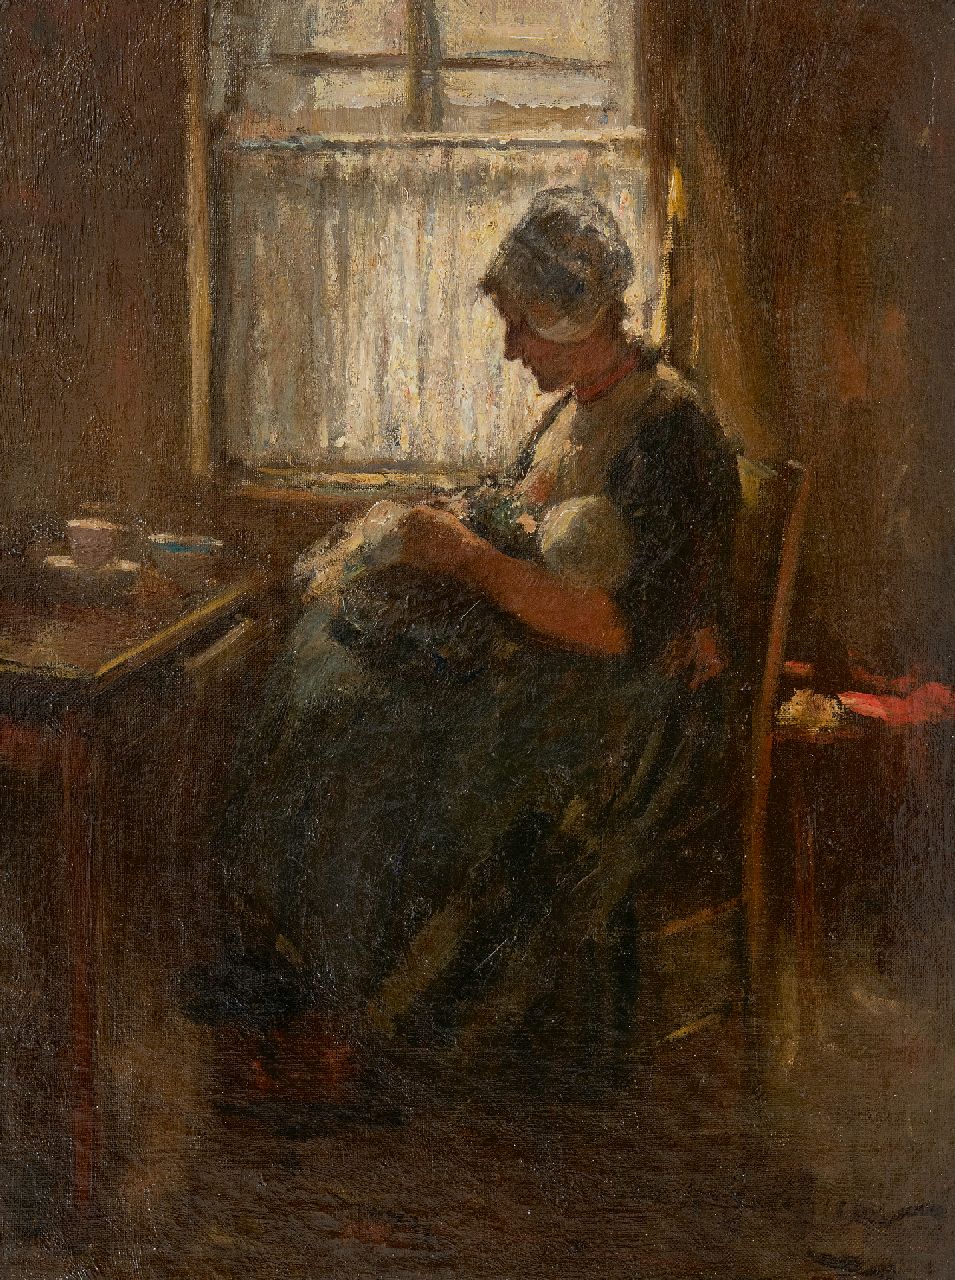 Robert Gemmell Hutchison | A Volendam mother and child, oil on canvas, 40.7 x 30.5 cm, signed l.r.